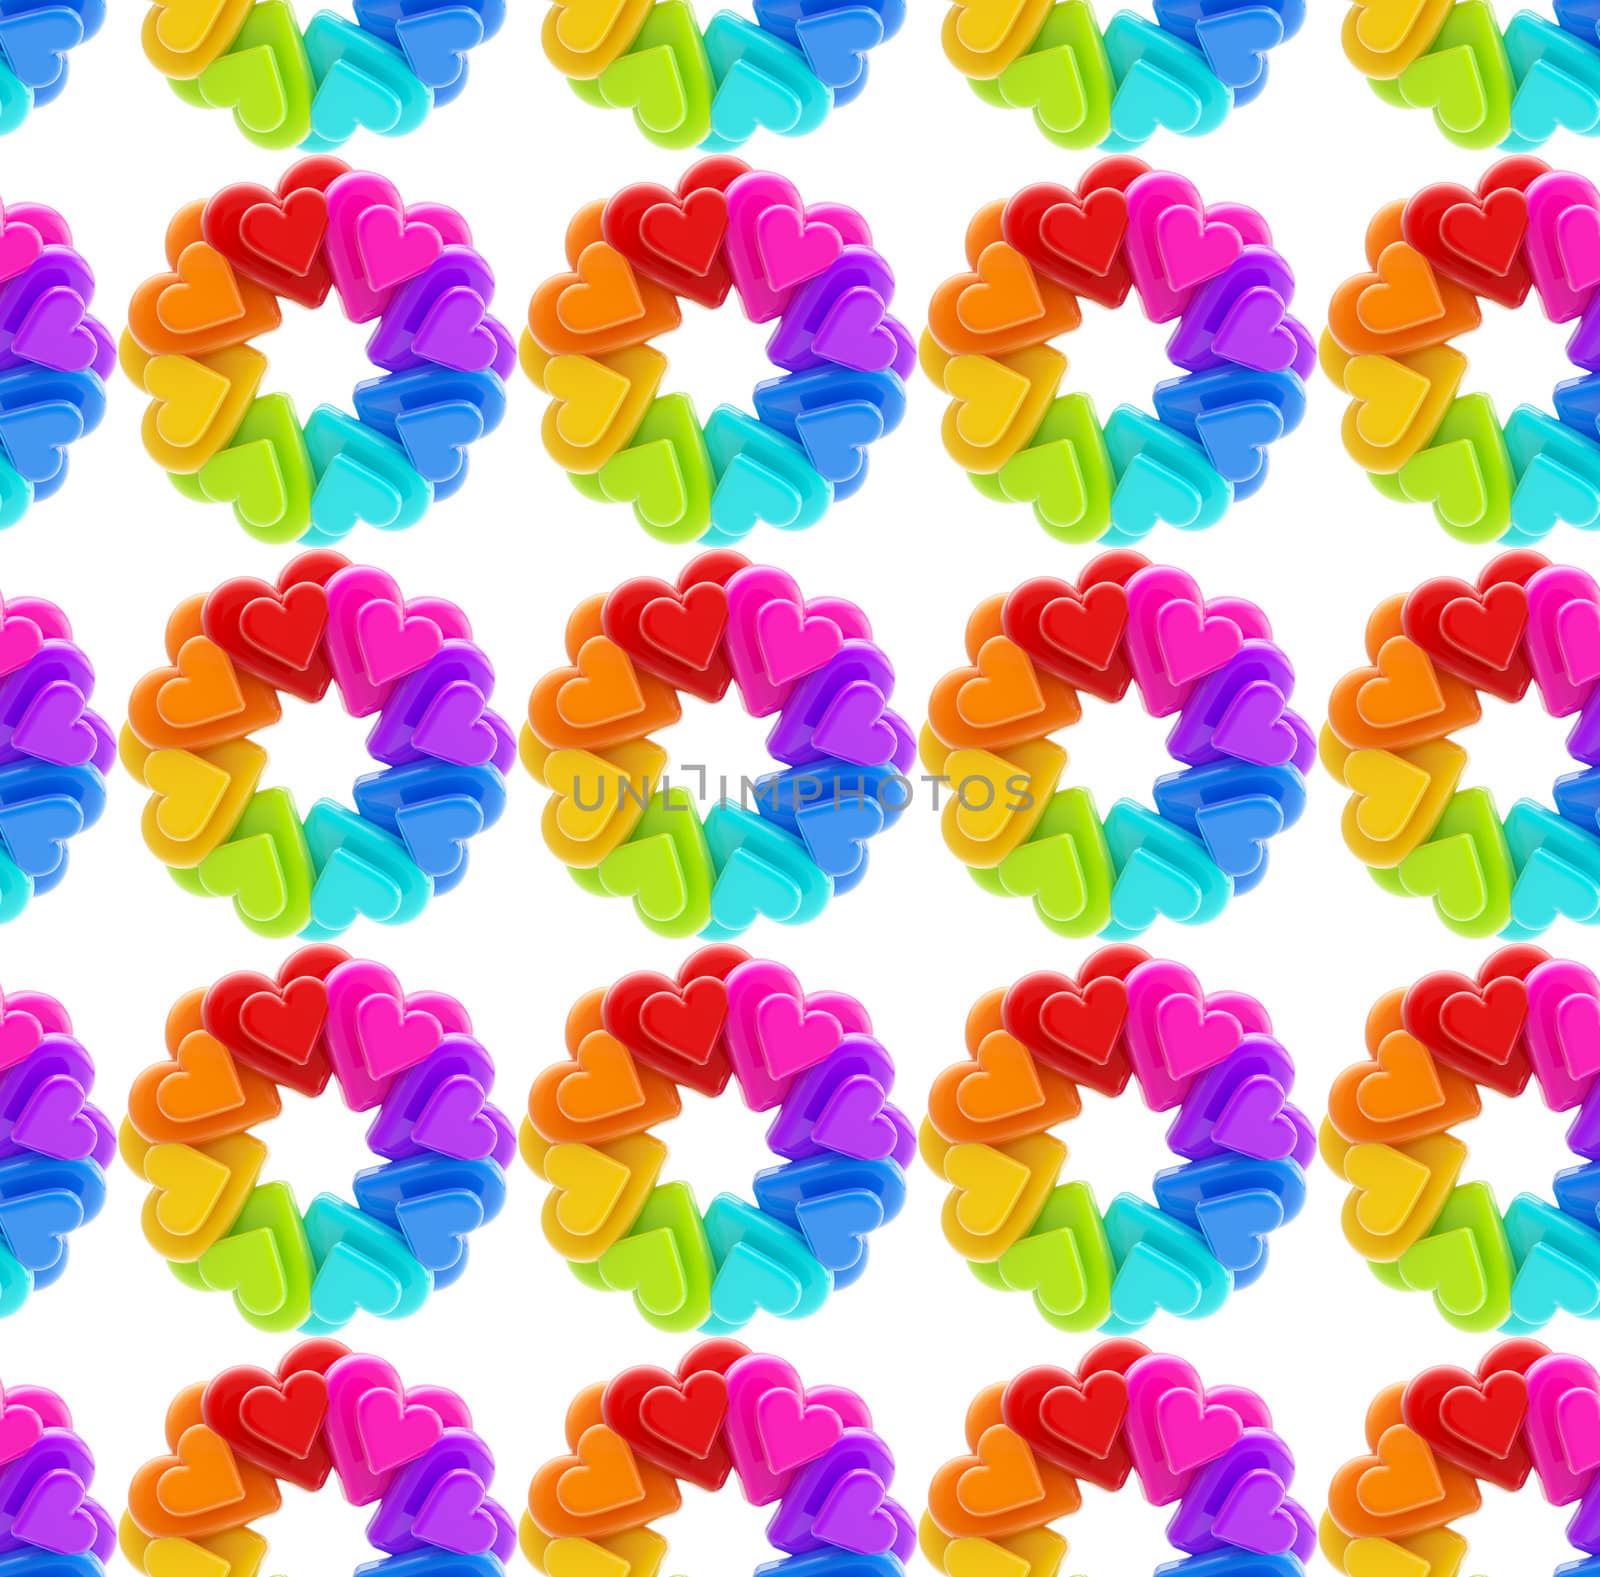 Seamless abstract background made of rainbow colored heart shapes